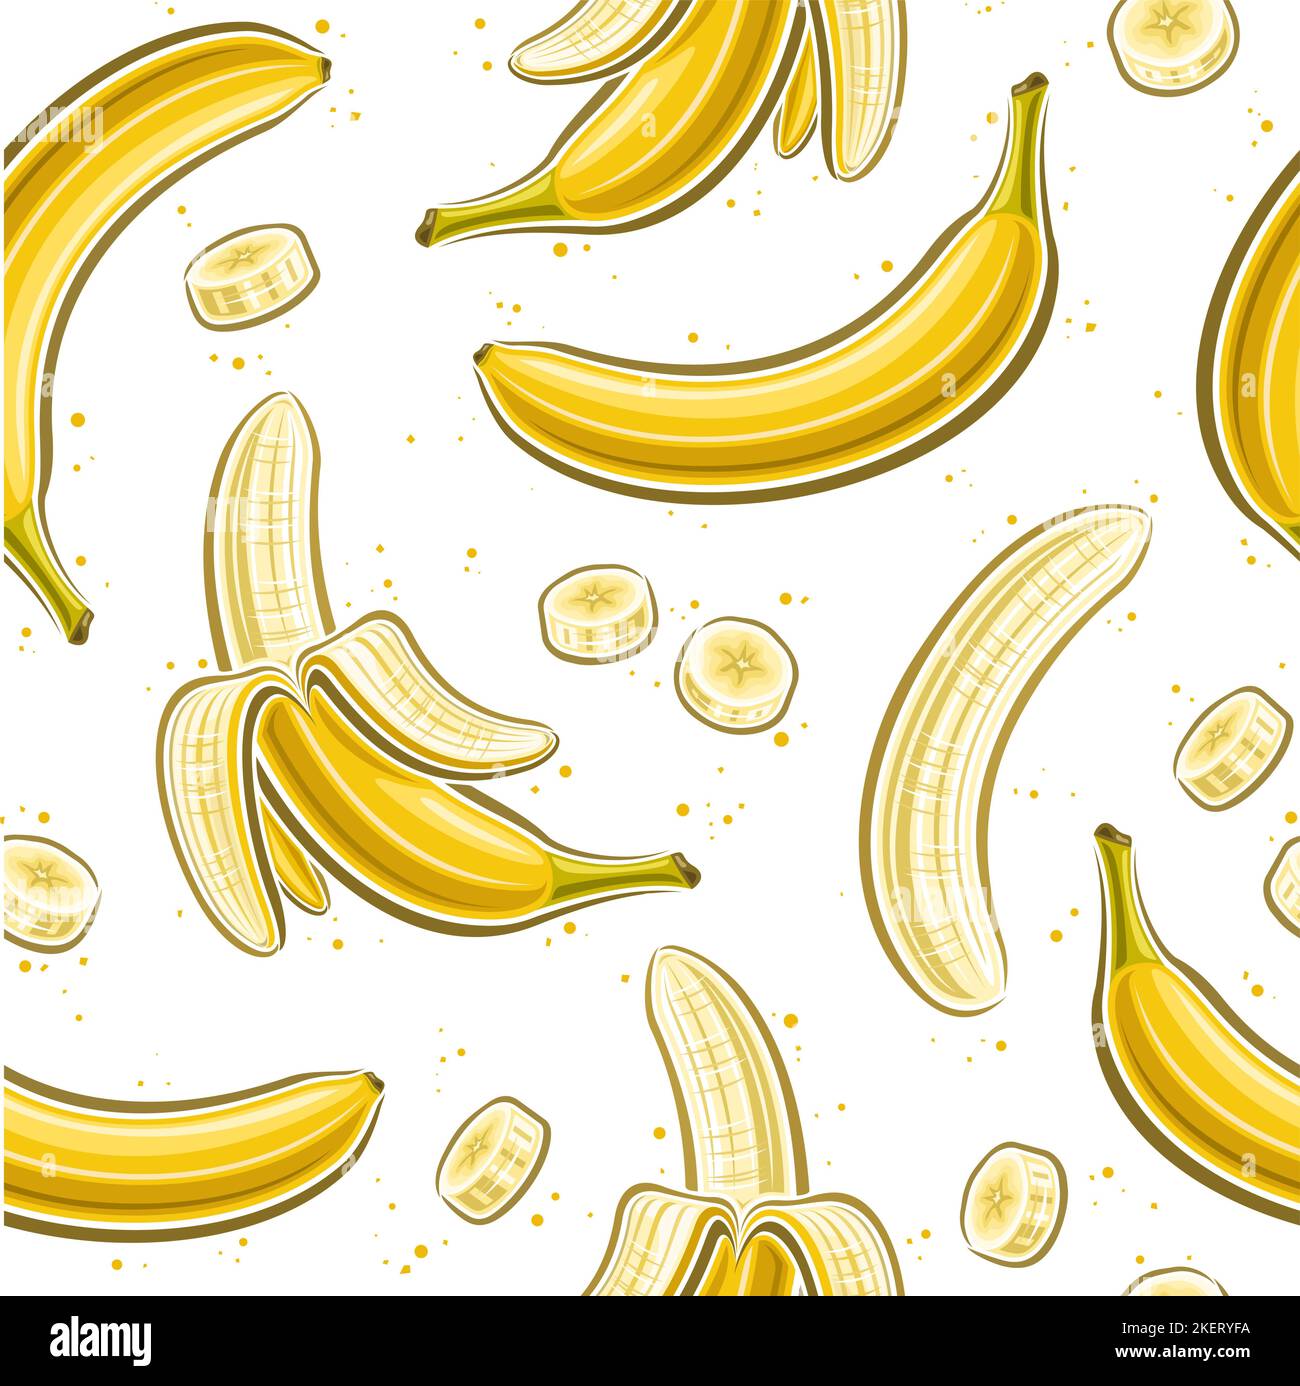 Vector Banana Seamless Pattern, square repeating background with cut out illustrations of whole opened ripe bananas, group of flat lay single closed b Stock Vector